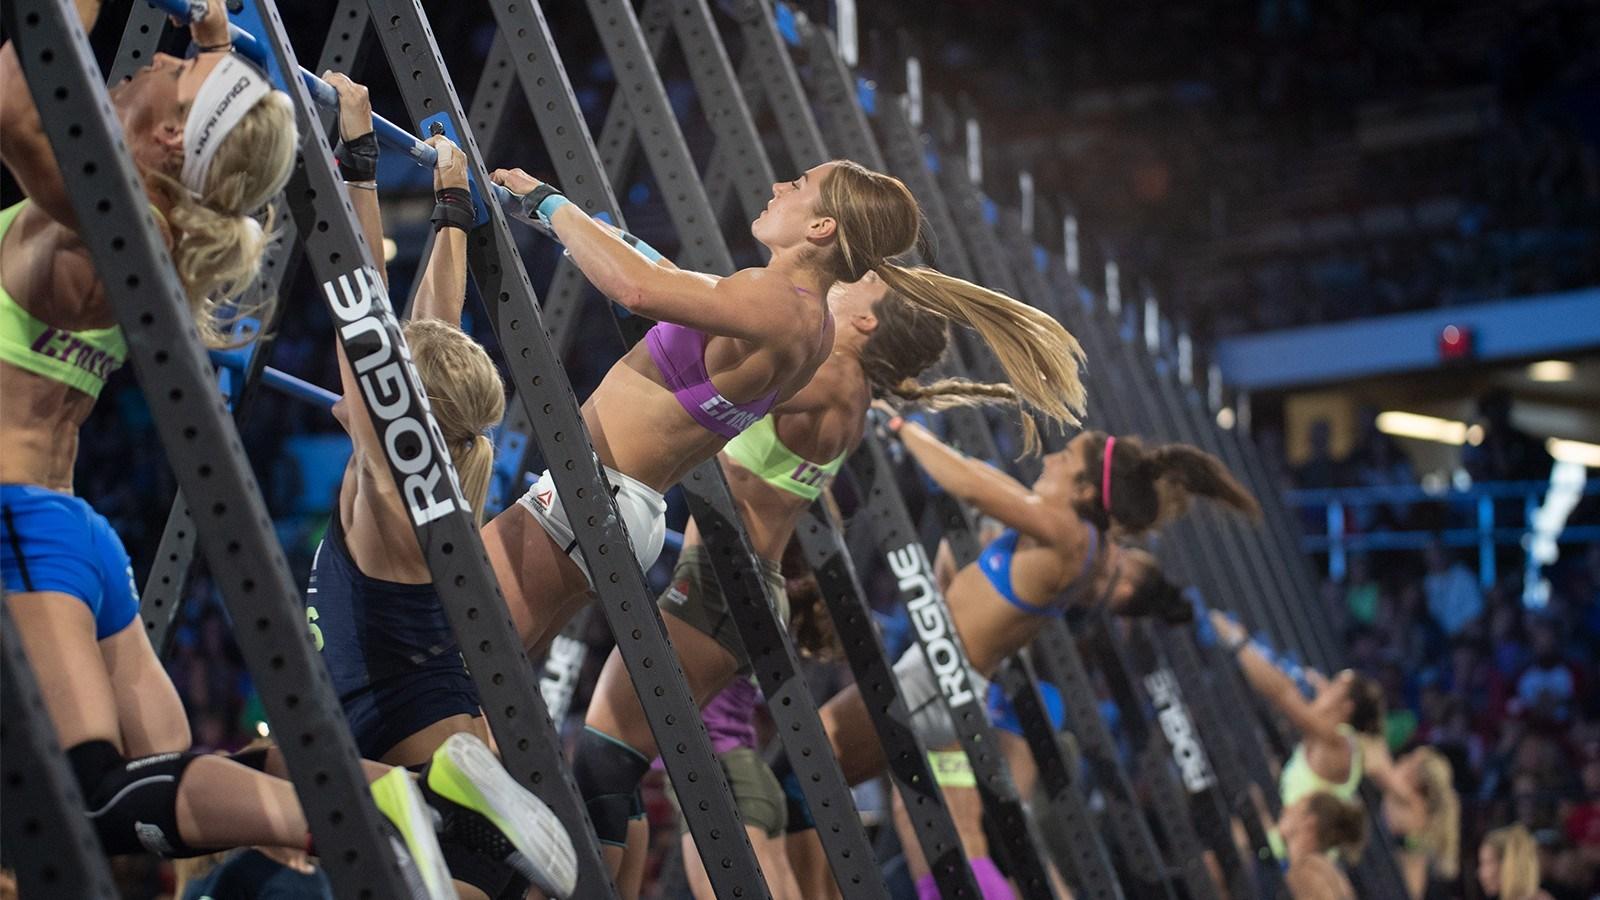 Upcoming changes in the CrossFit Games 2019